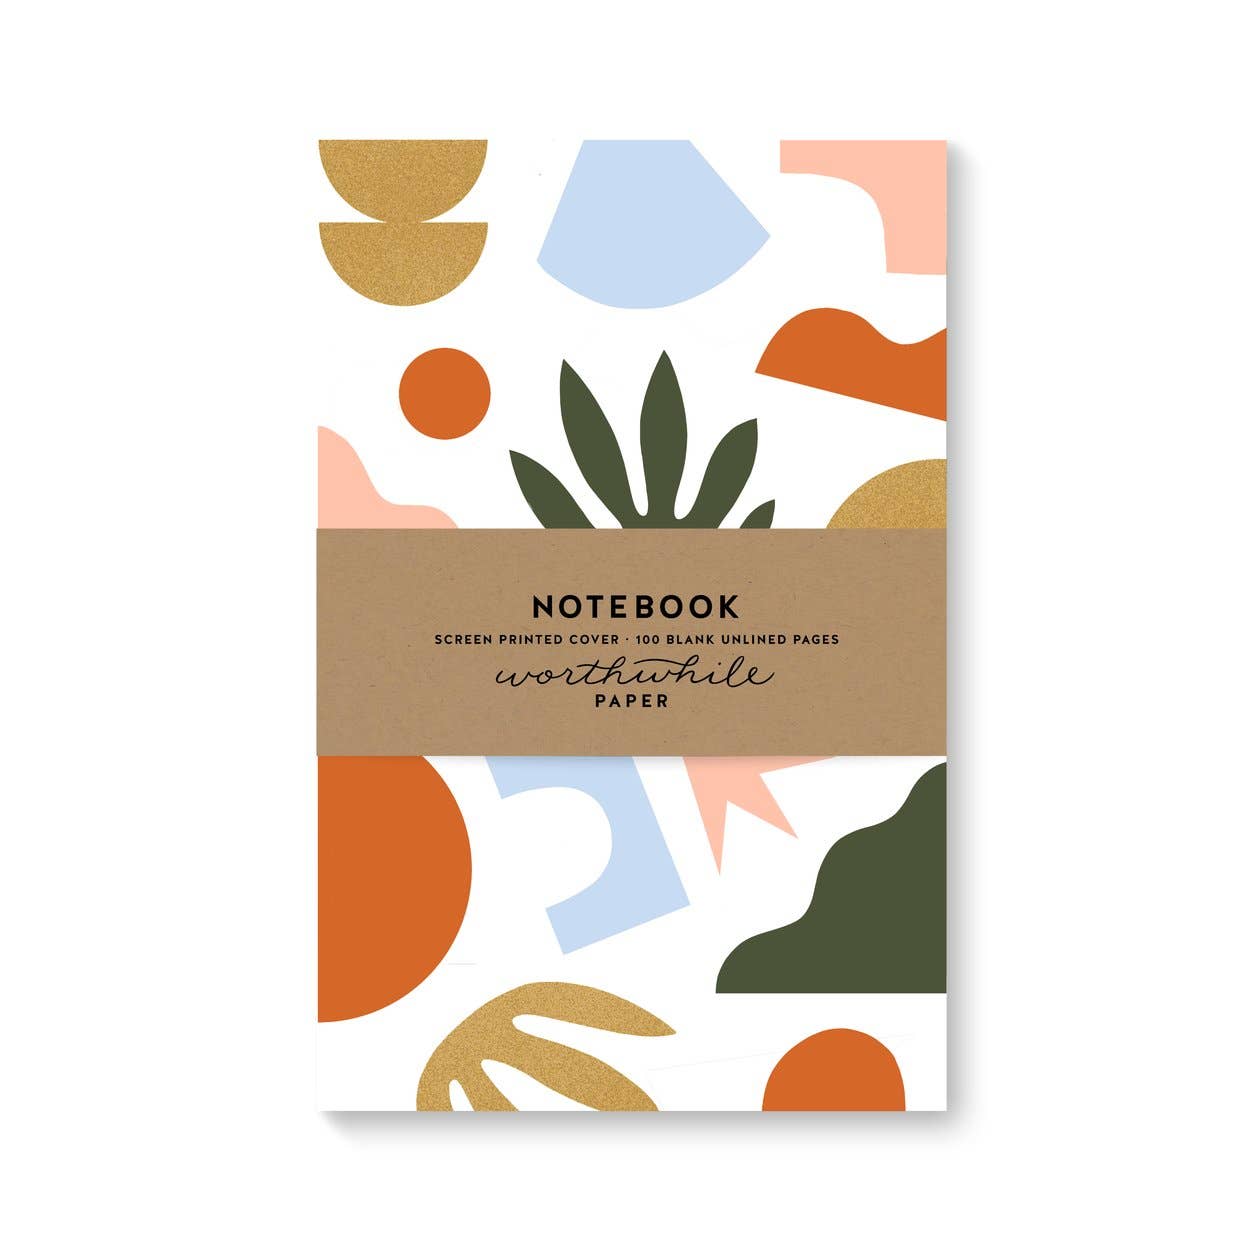 Worthwhile - Shapes & Colors Notebook